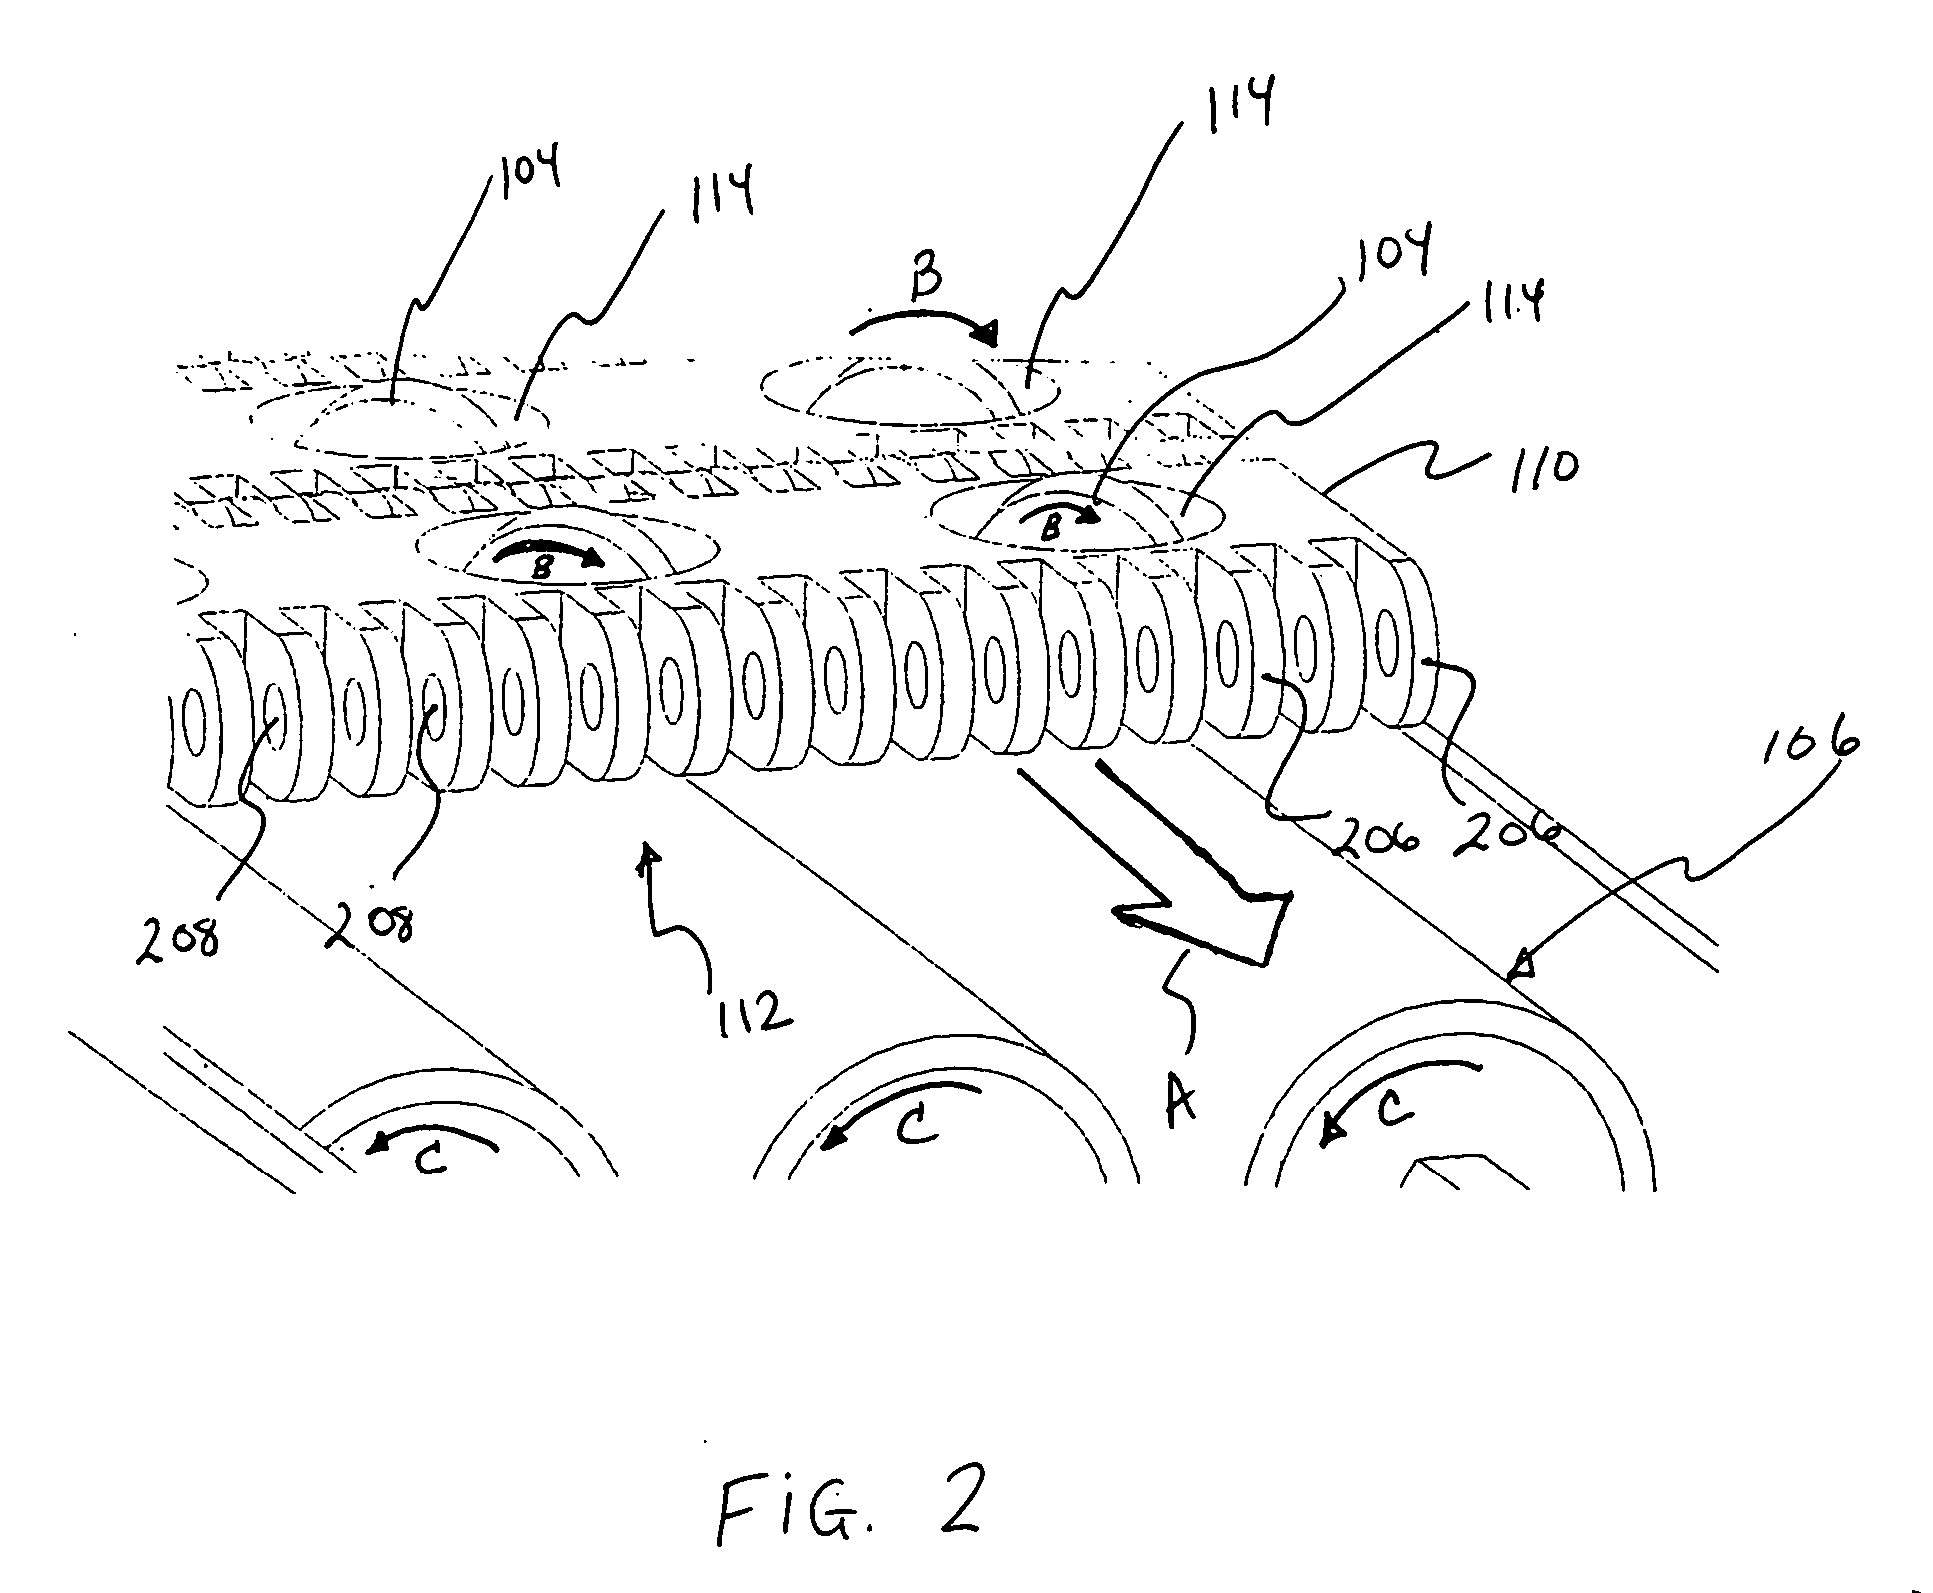 Apparatus and methods for conveying objects